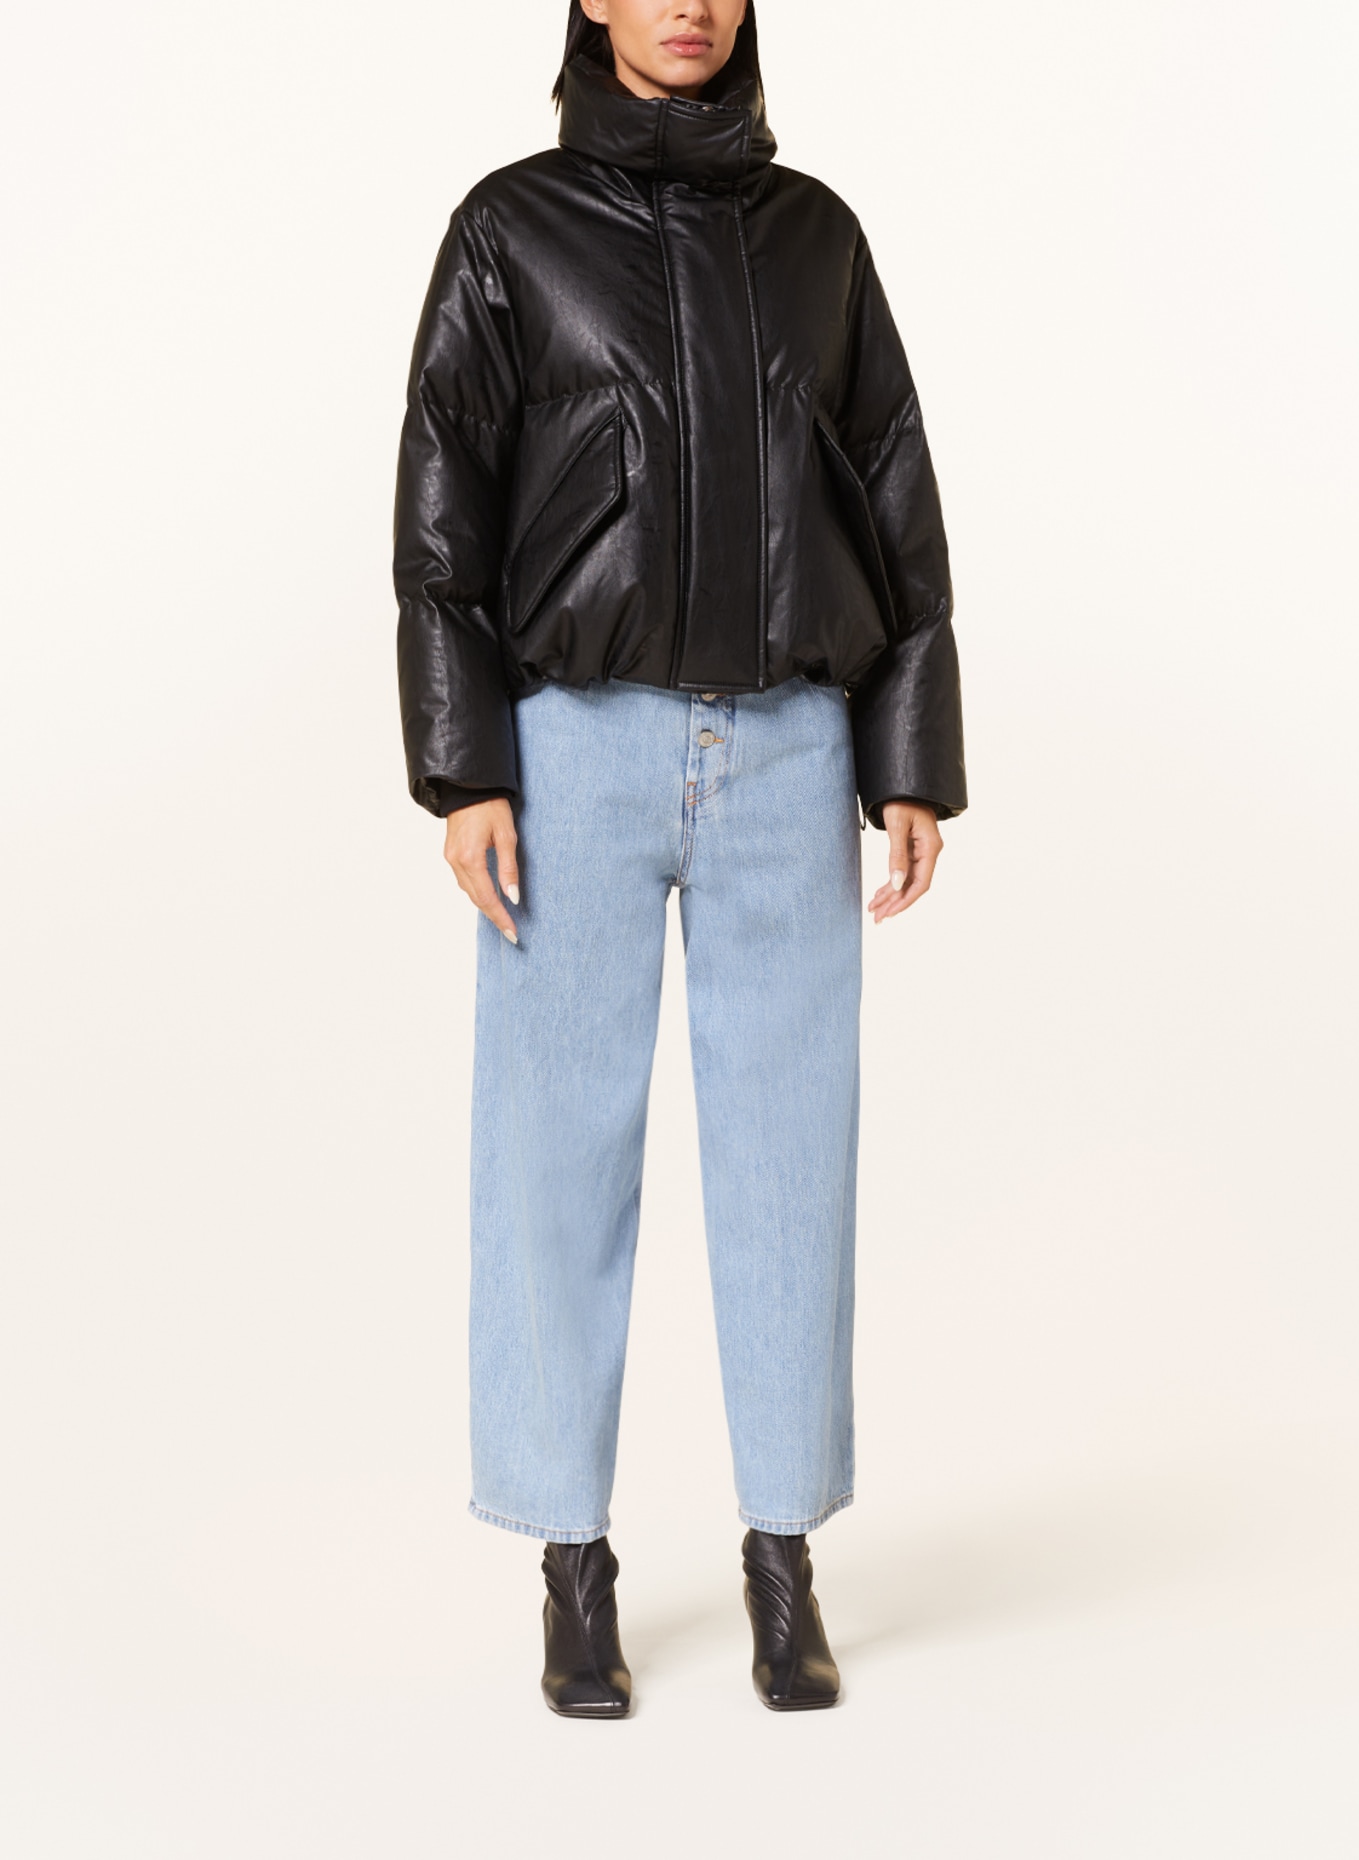 MM6 Maison Margiela Oversized down jacket in leather look, Color: BLACK (Image 2)